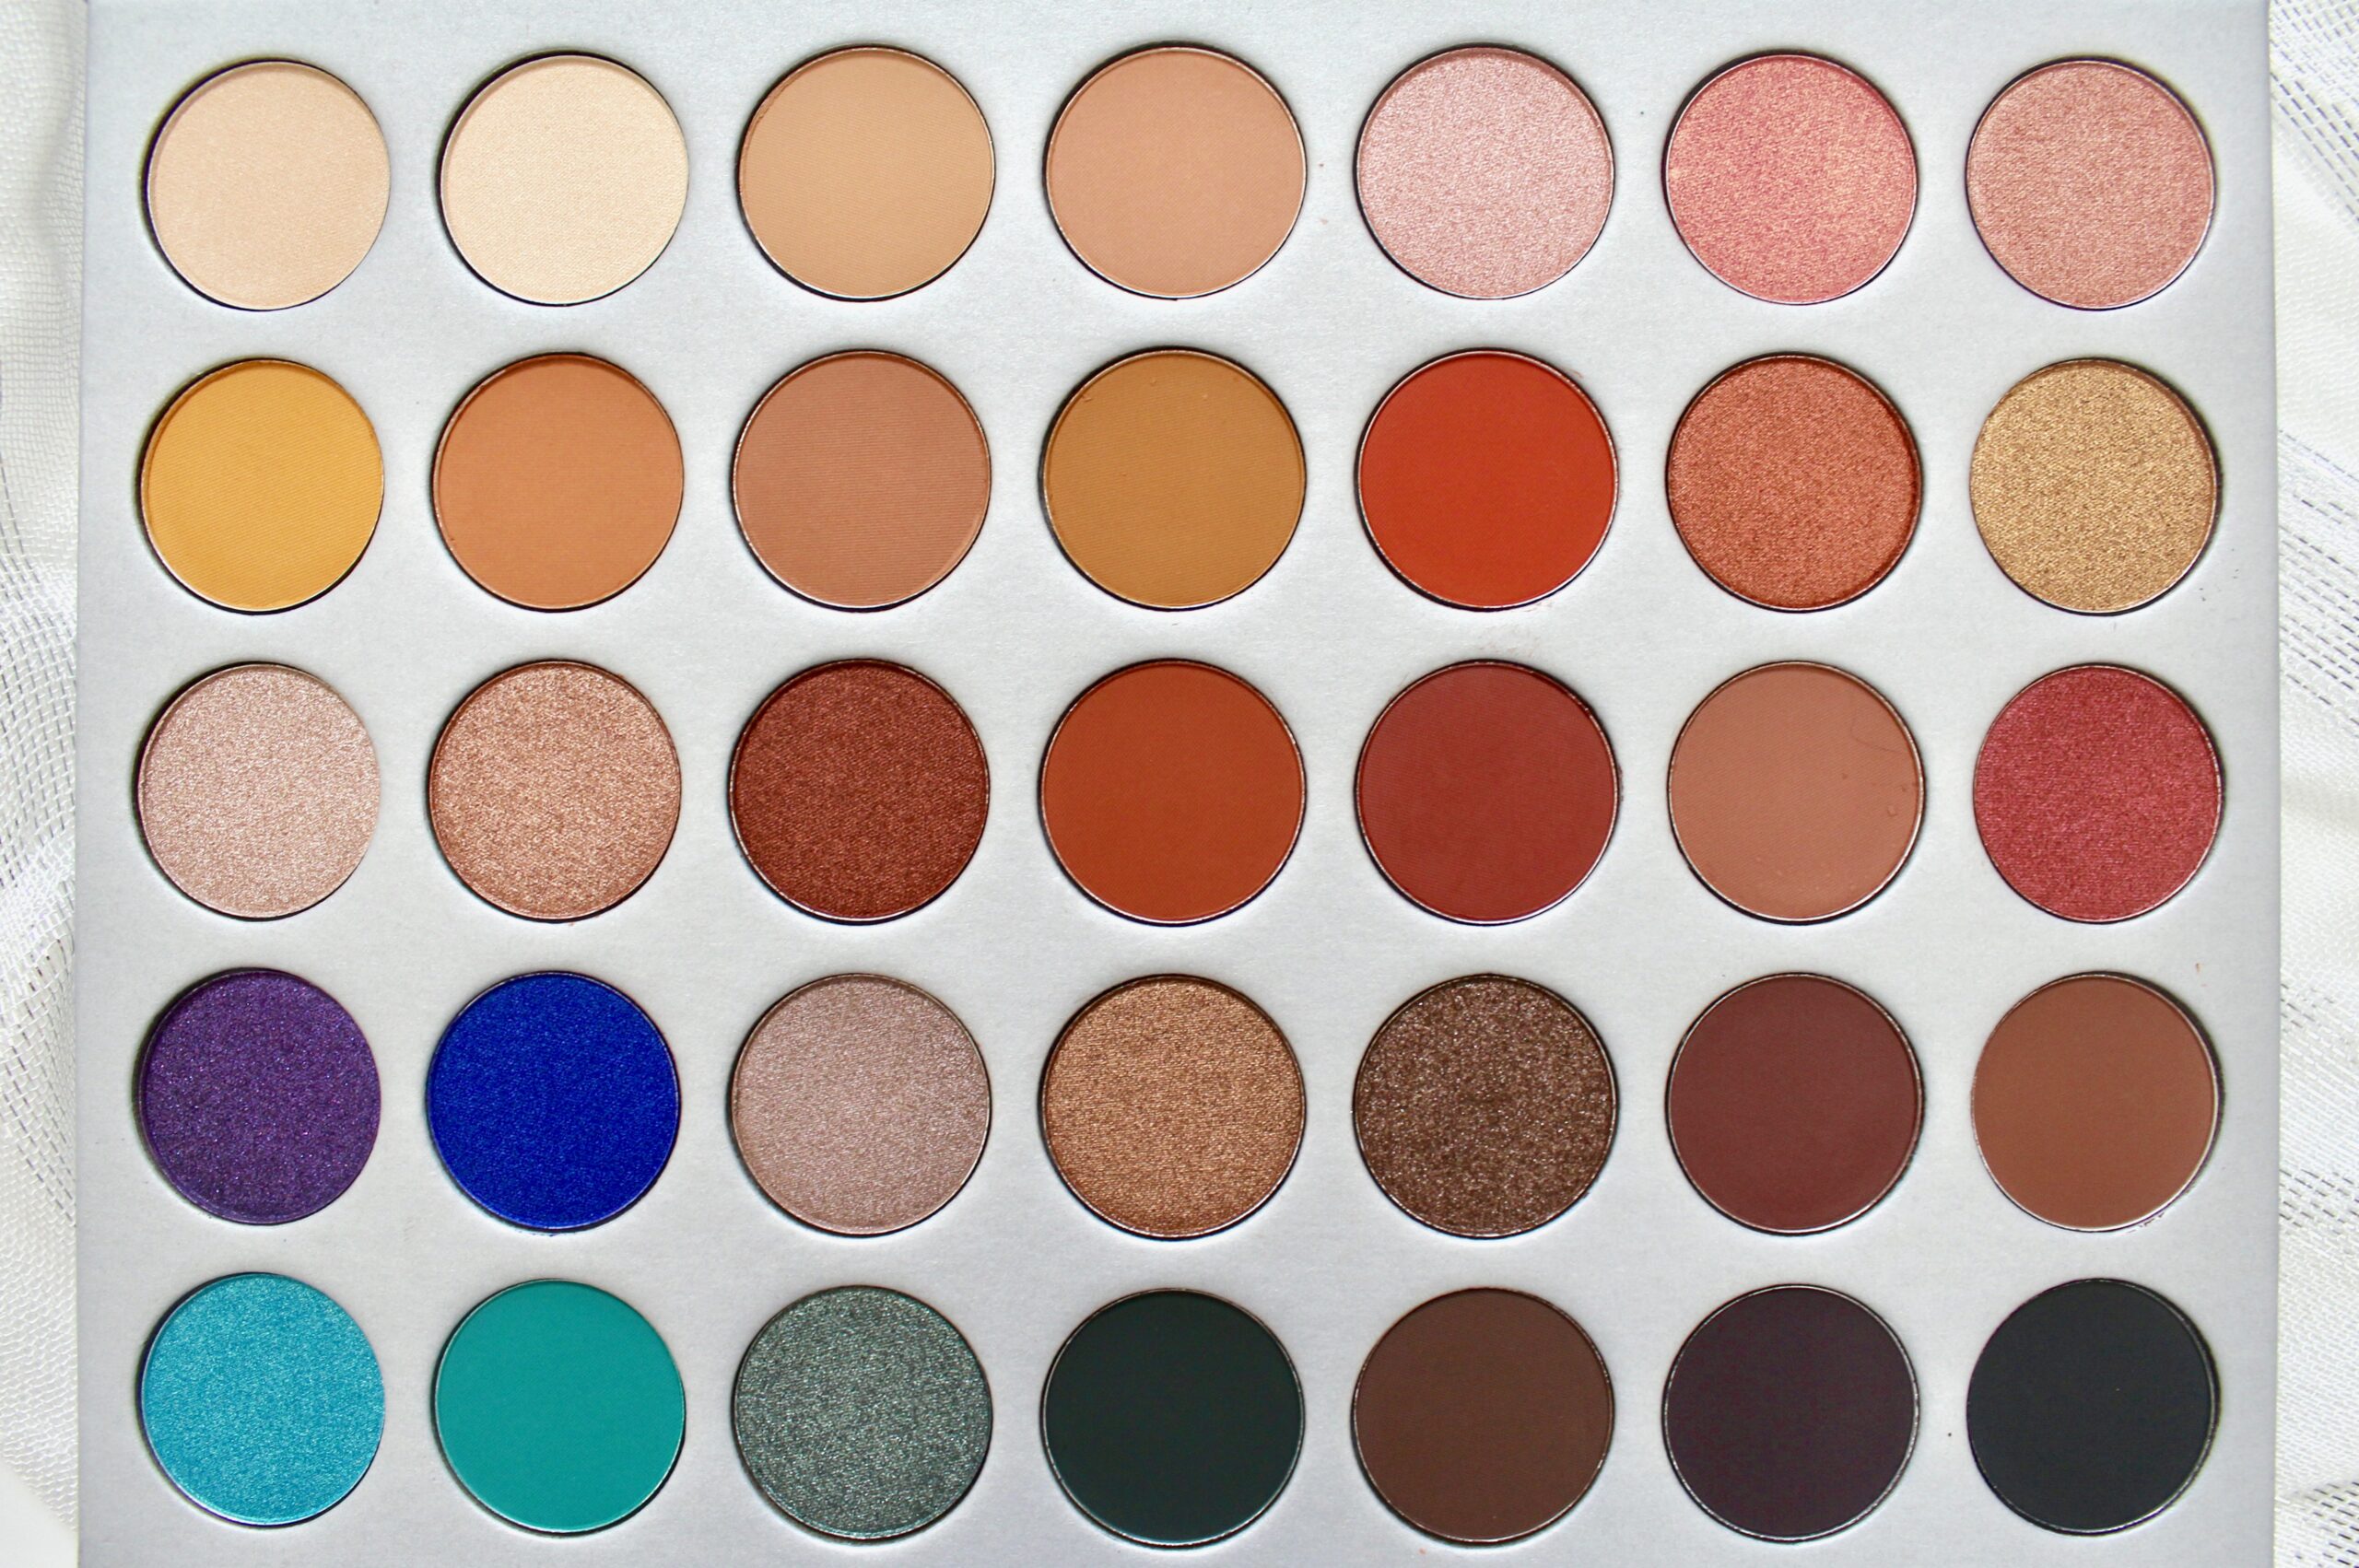 Becca x Jaclyn Hill Palette: Is It All Hype or Nah? —